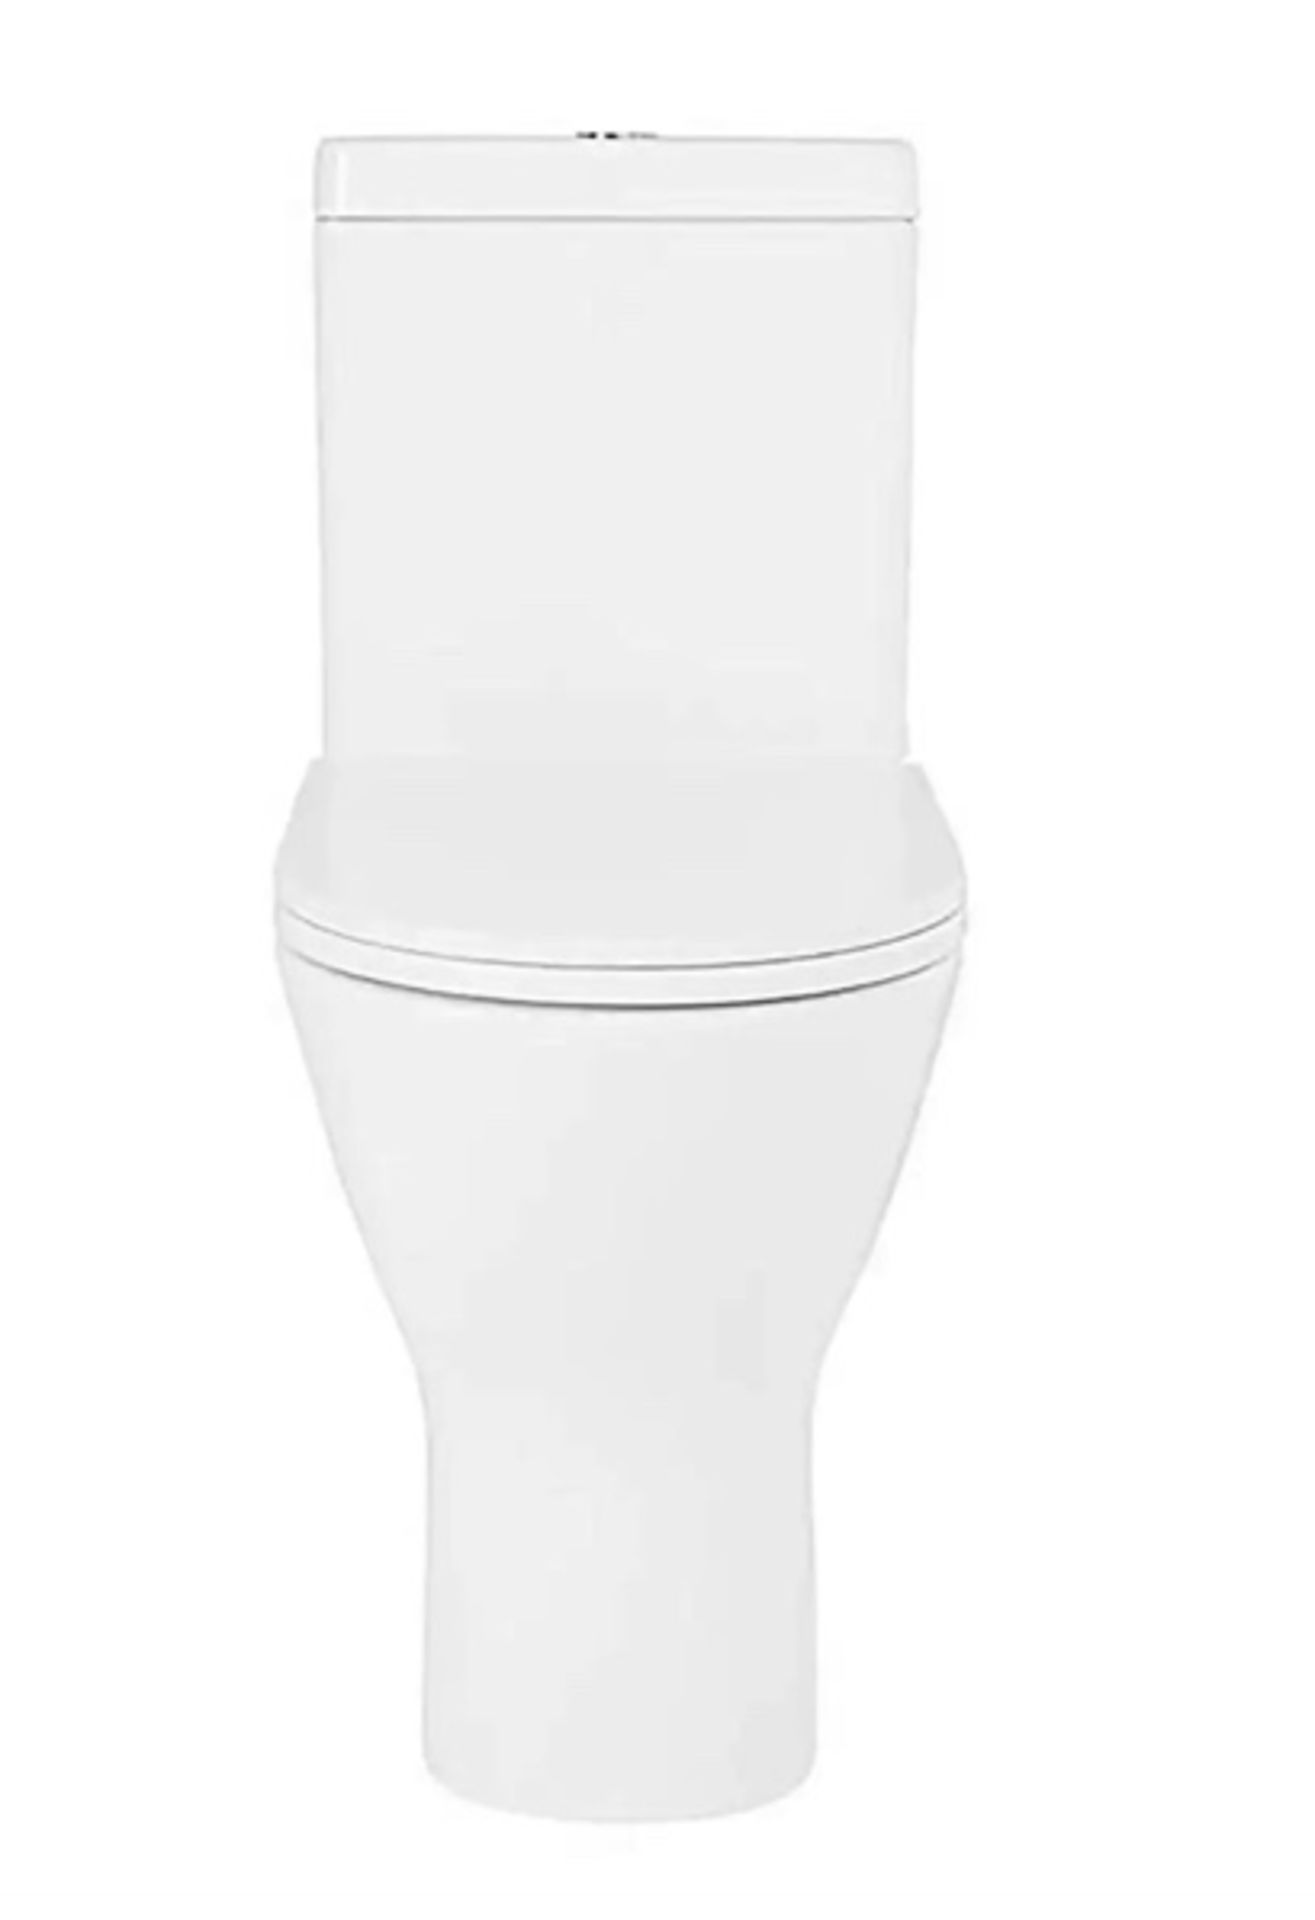 Brand New Falcon Comfort Rimless Back To Wall Close Coupled Toilet Soft Close Toilet Seat RRP £32...